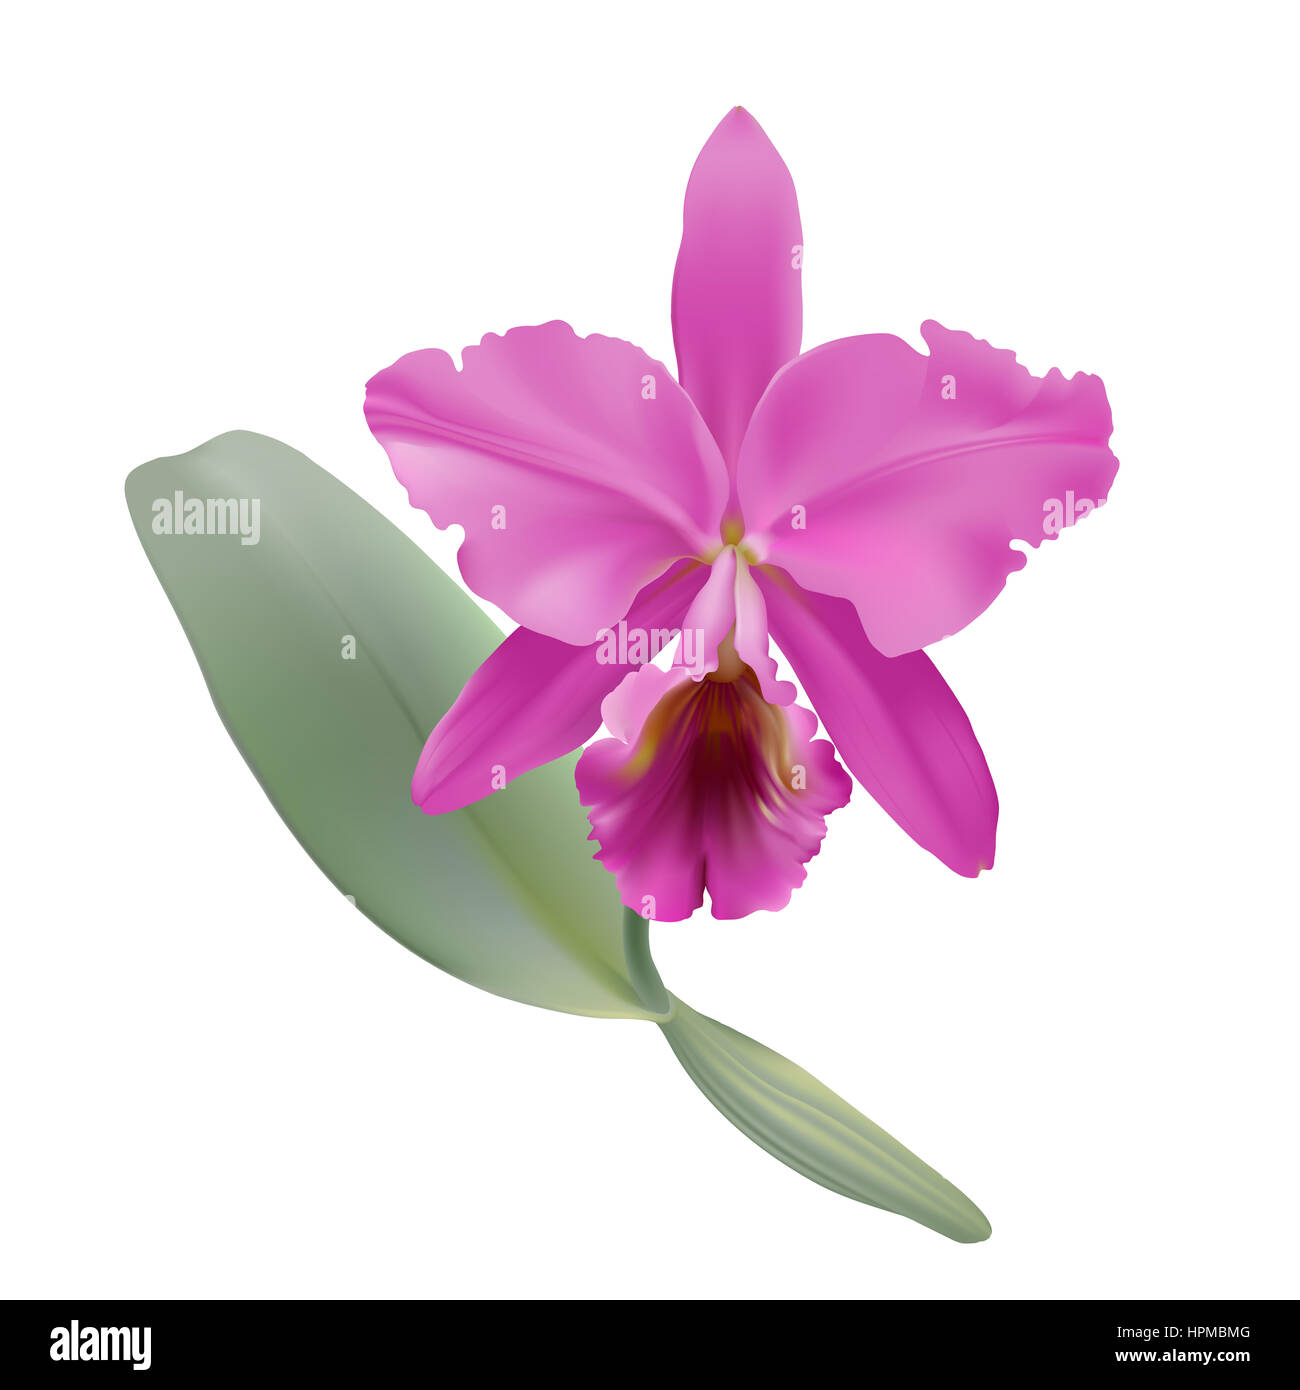 Orchid.  Digital illustration of a tropical orchid Cattleya warneri, with pink petals and lip, on white background. Stock Photo